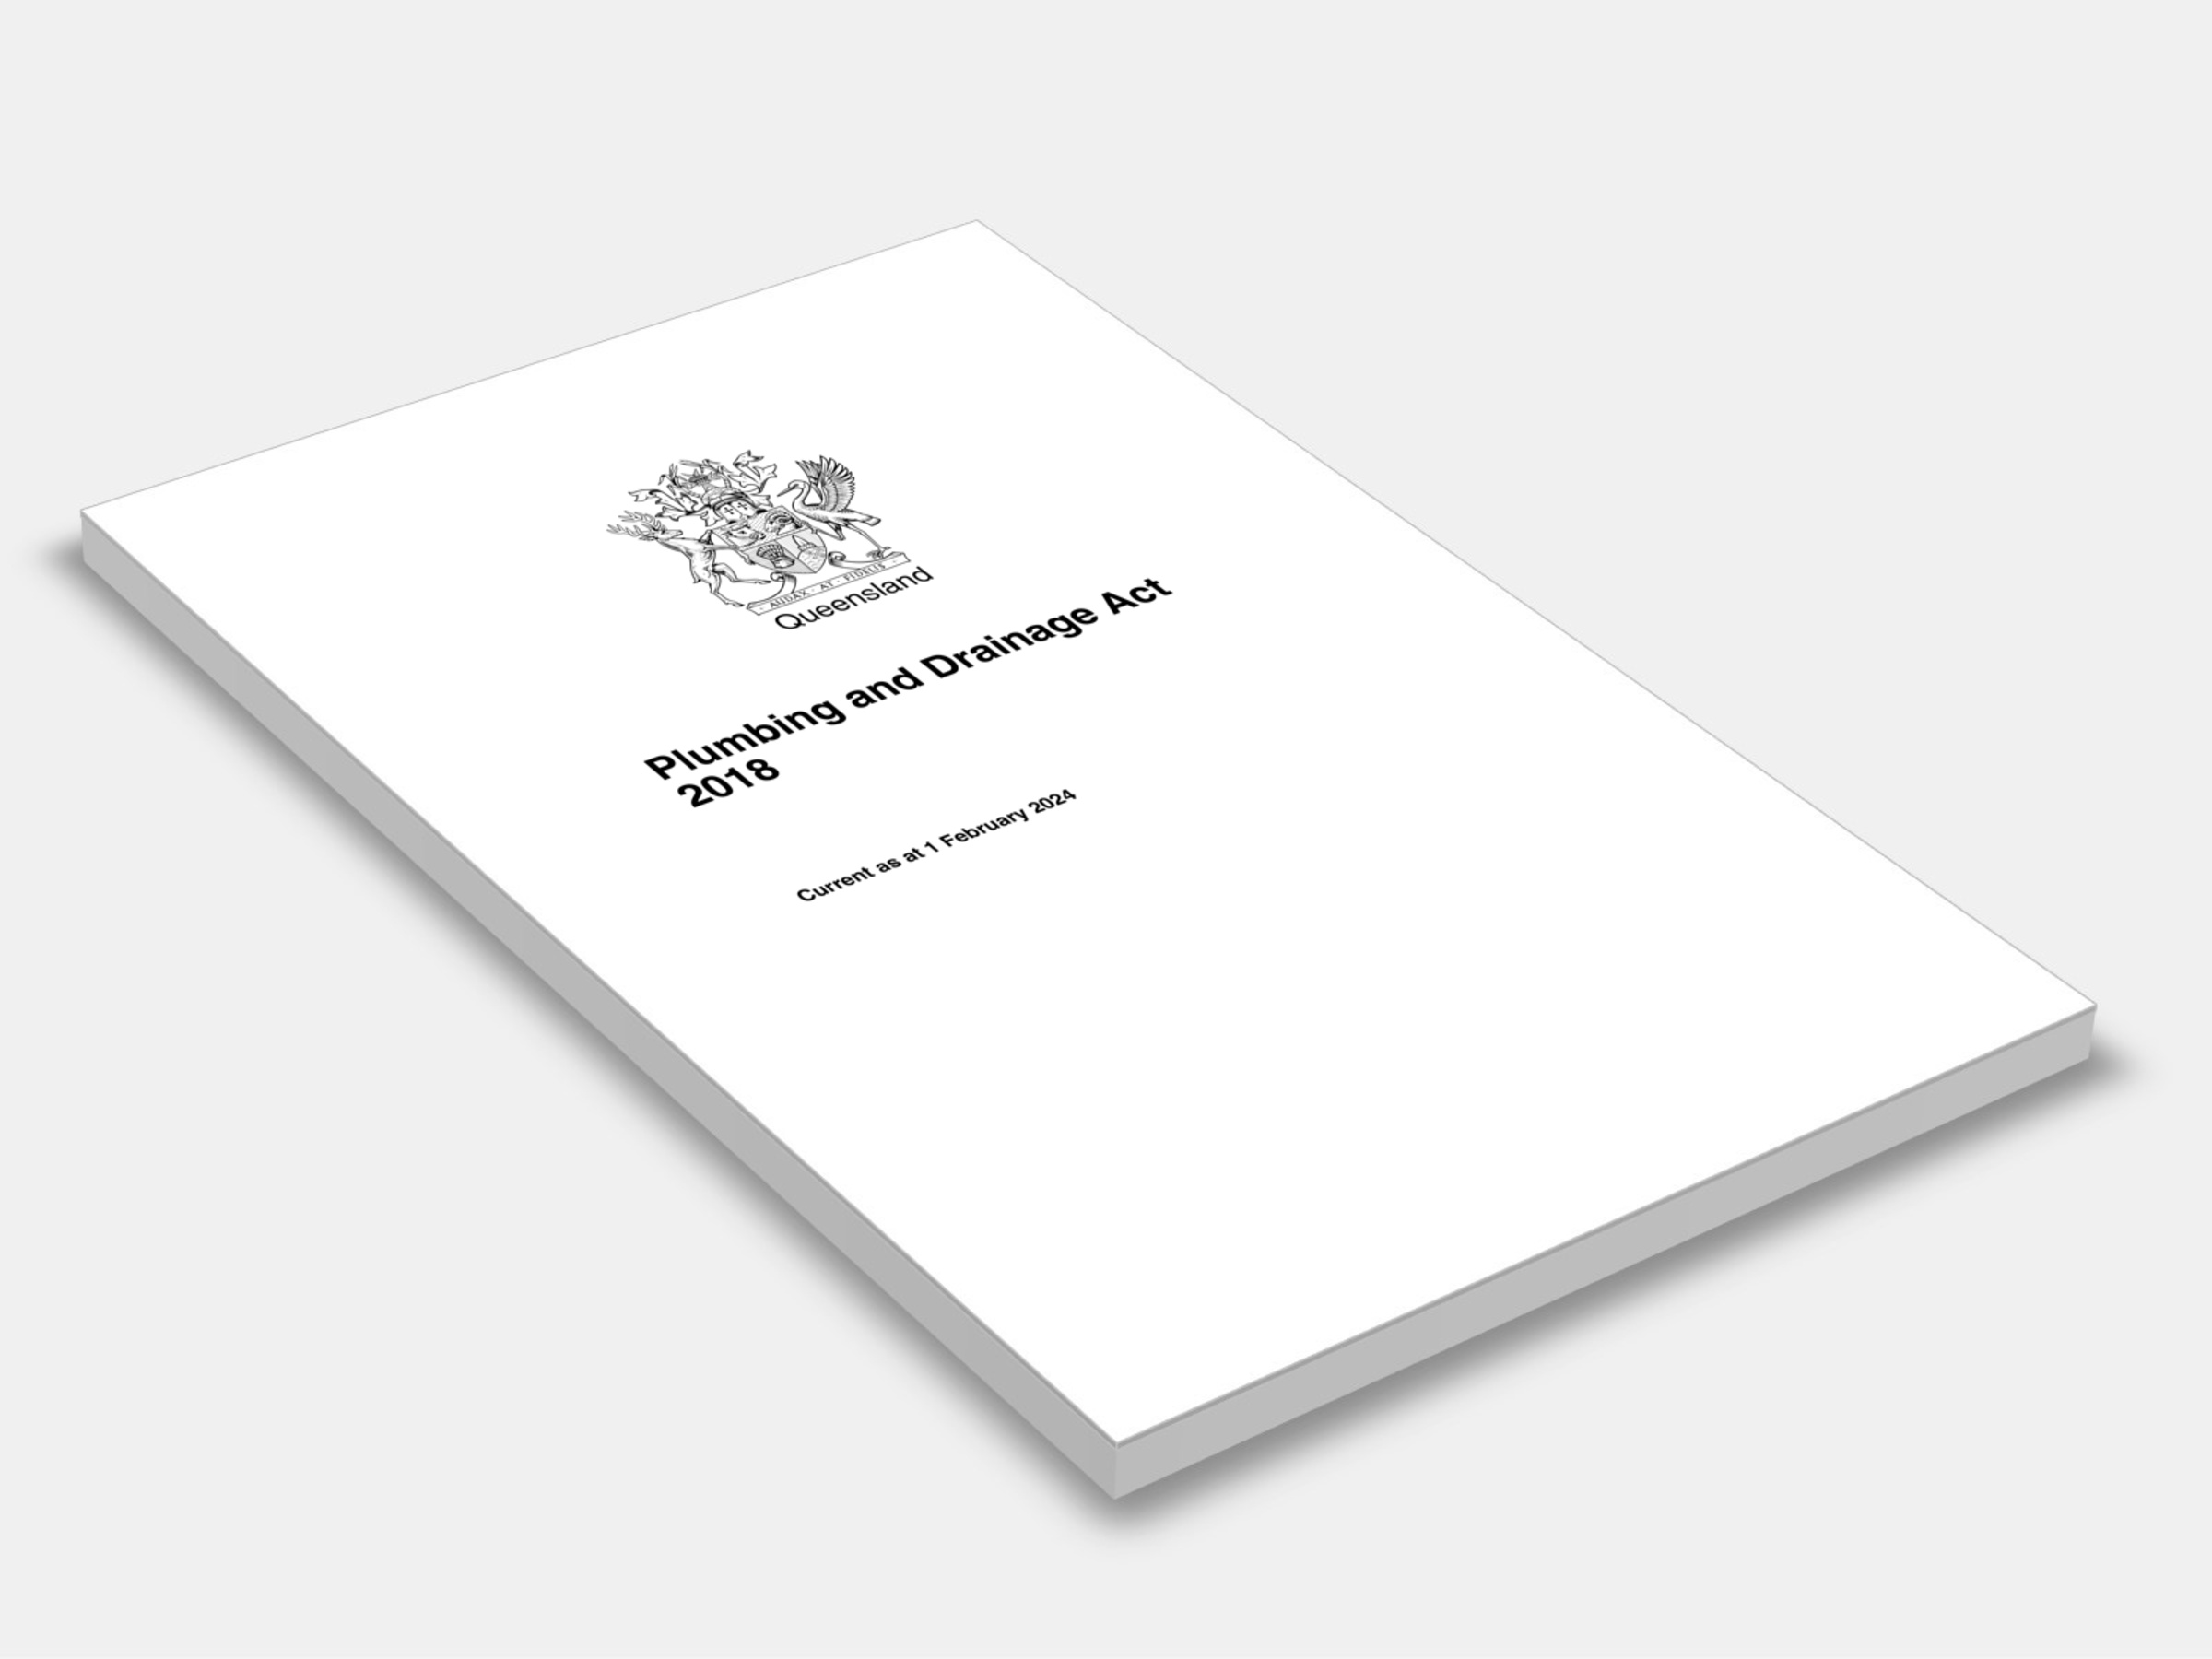 Plumbing and Drainage Act 2018 (QLD) 2018 cover